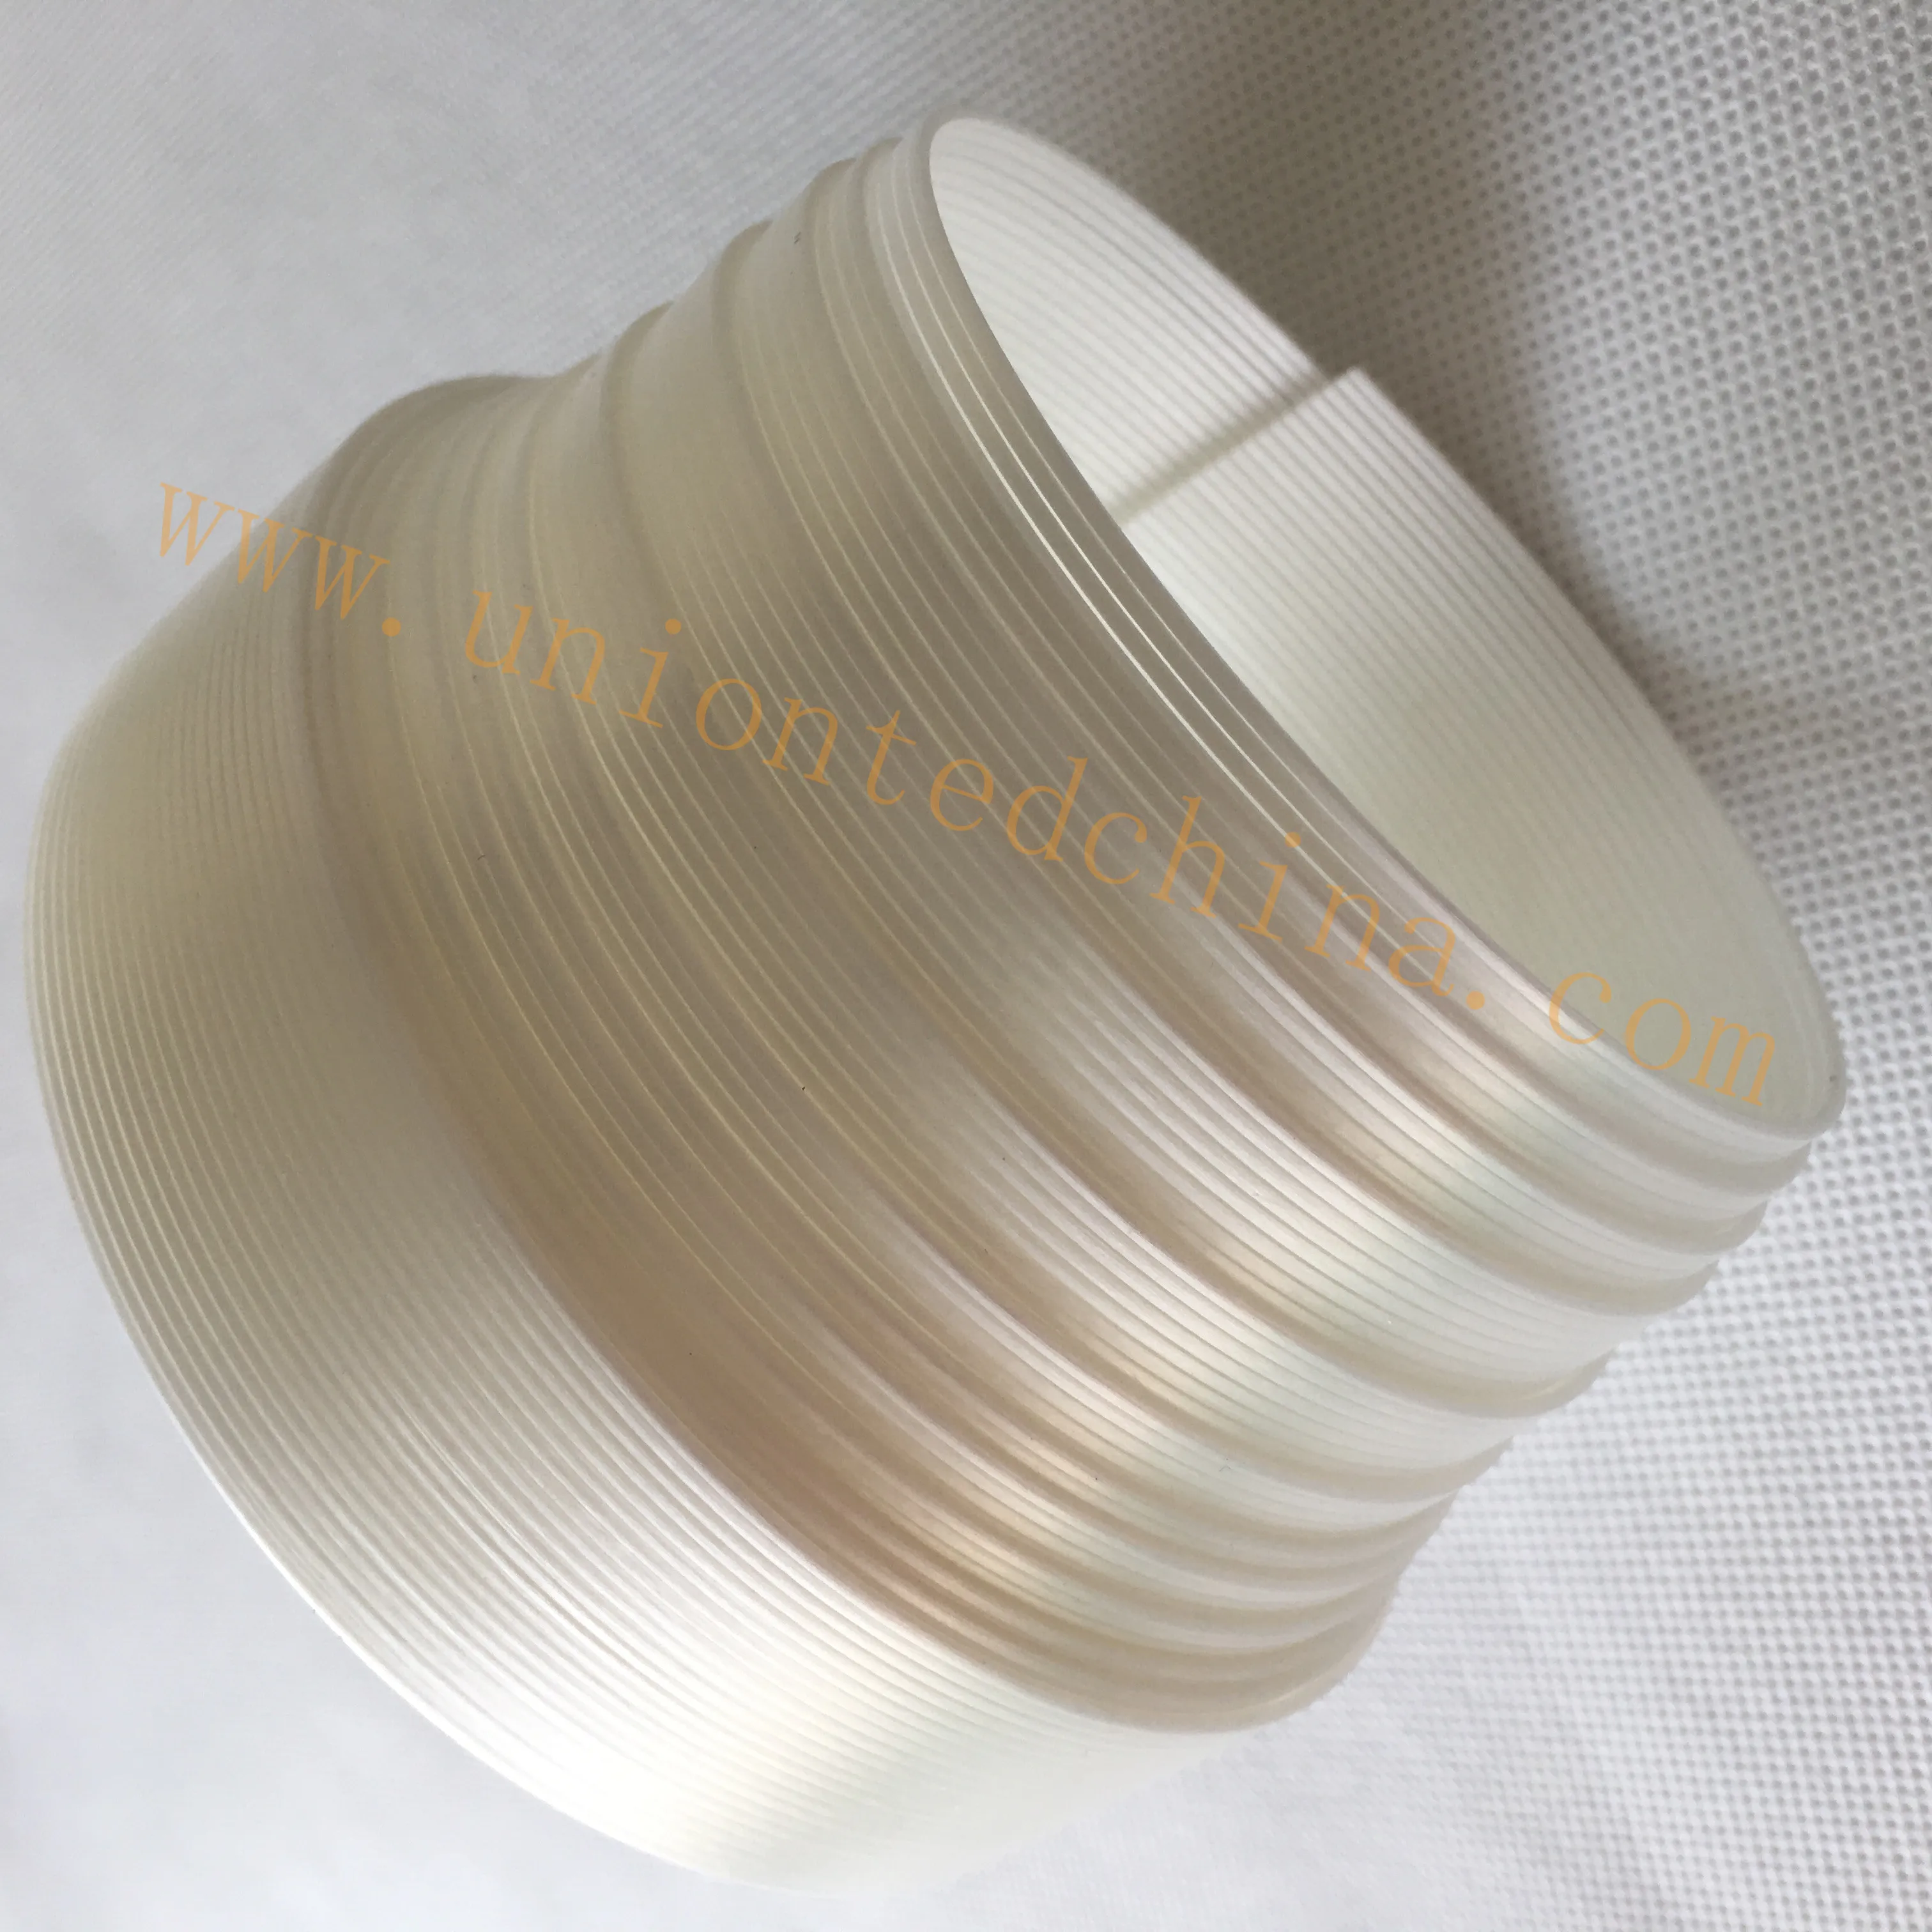 
16mm BS 680KGS 850M per roll packing polyester cord strap 